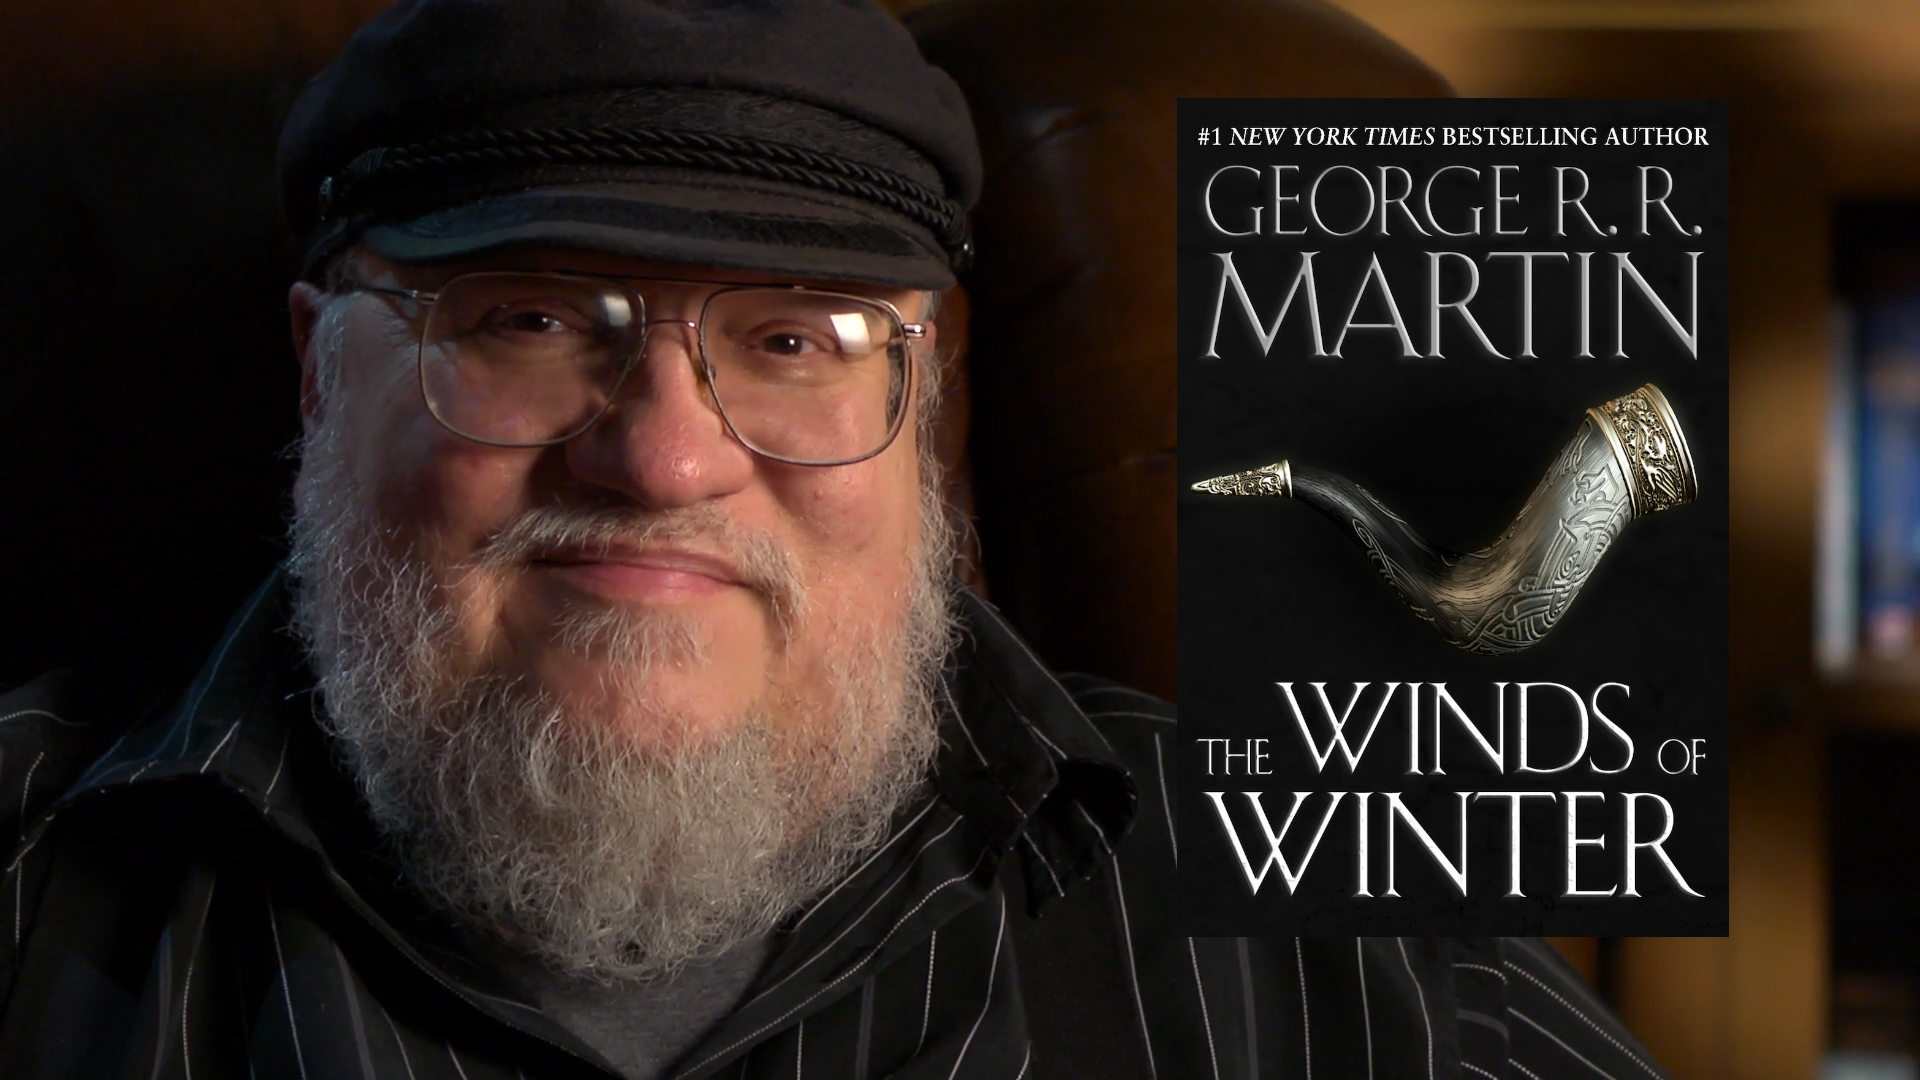 George R. R. Martin and The Winds of Winter